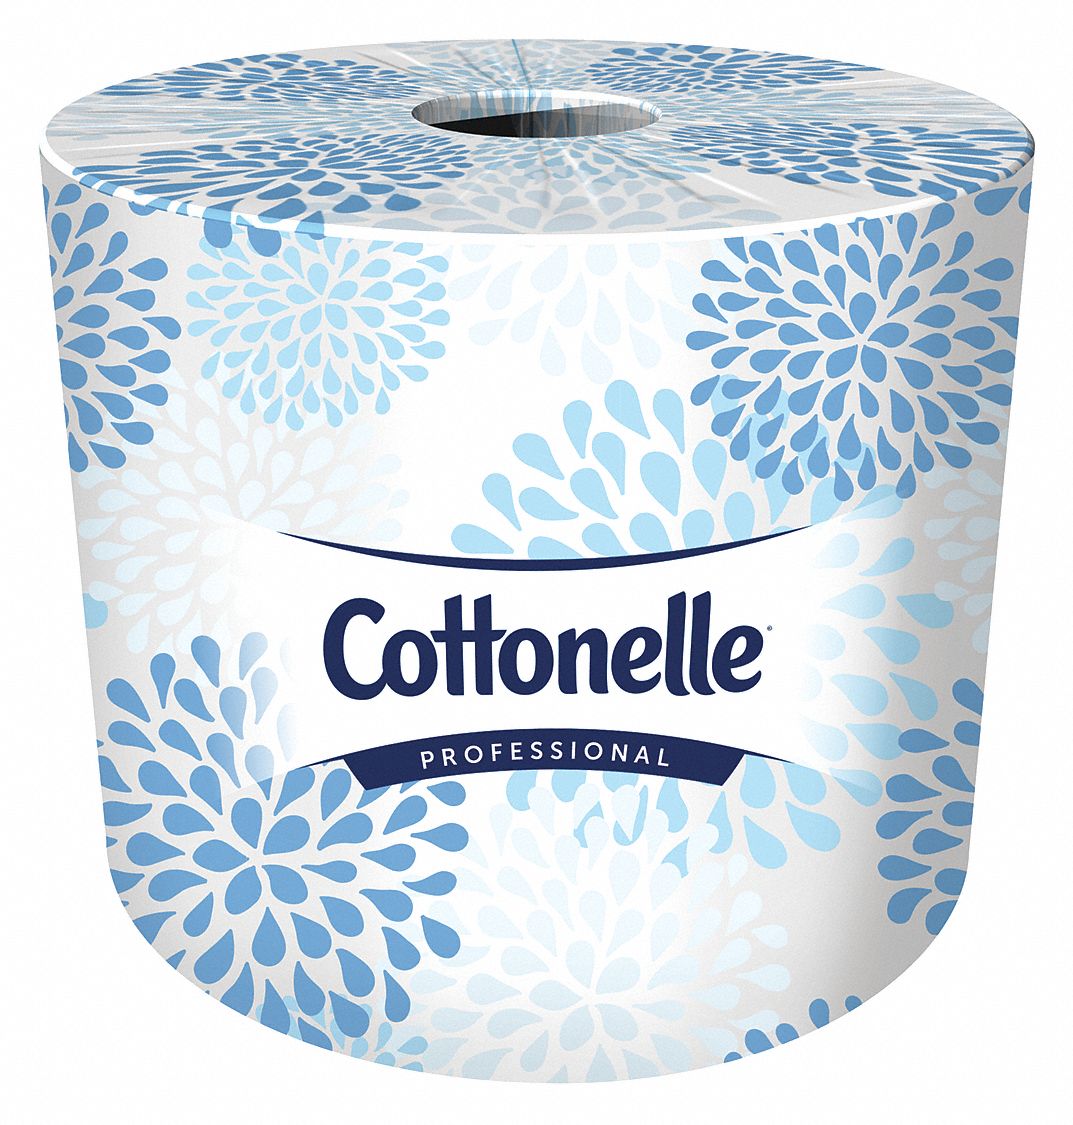 KIMBERLY-CLARK PROFESSIONAL, 2 Ply, 451 Sheets, Cottonelle Tissue Roll ...